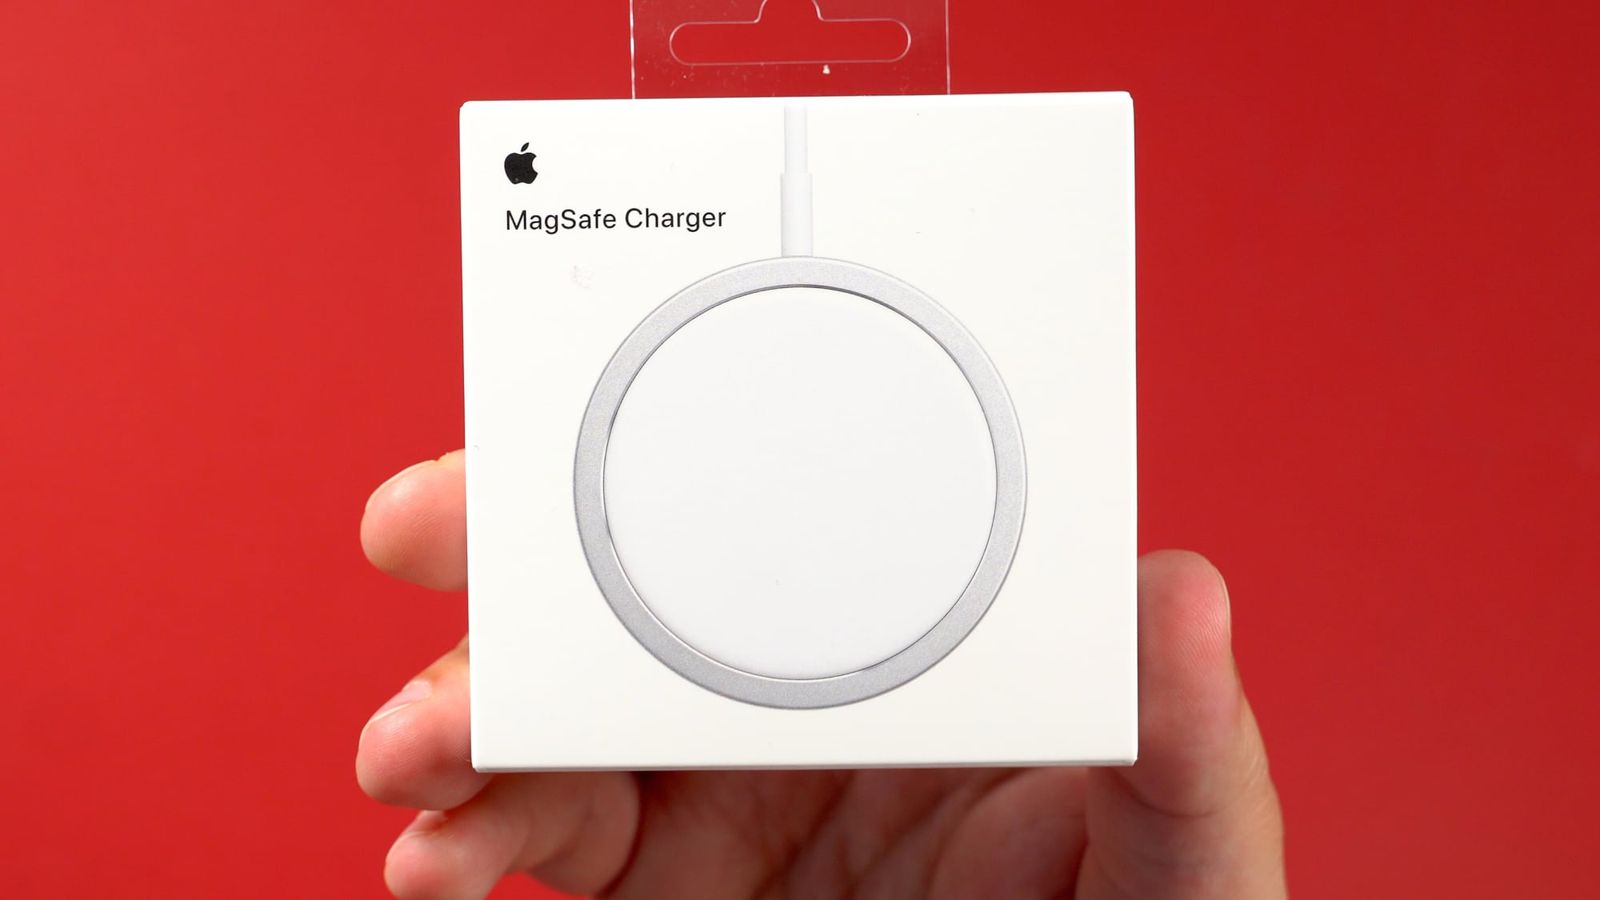 Deals: Apple's MagSafe Charger Hits Low Price at $29.85 ($9 Off) -